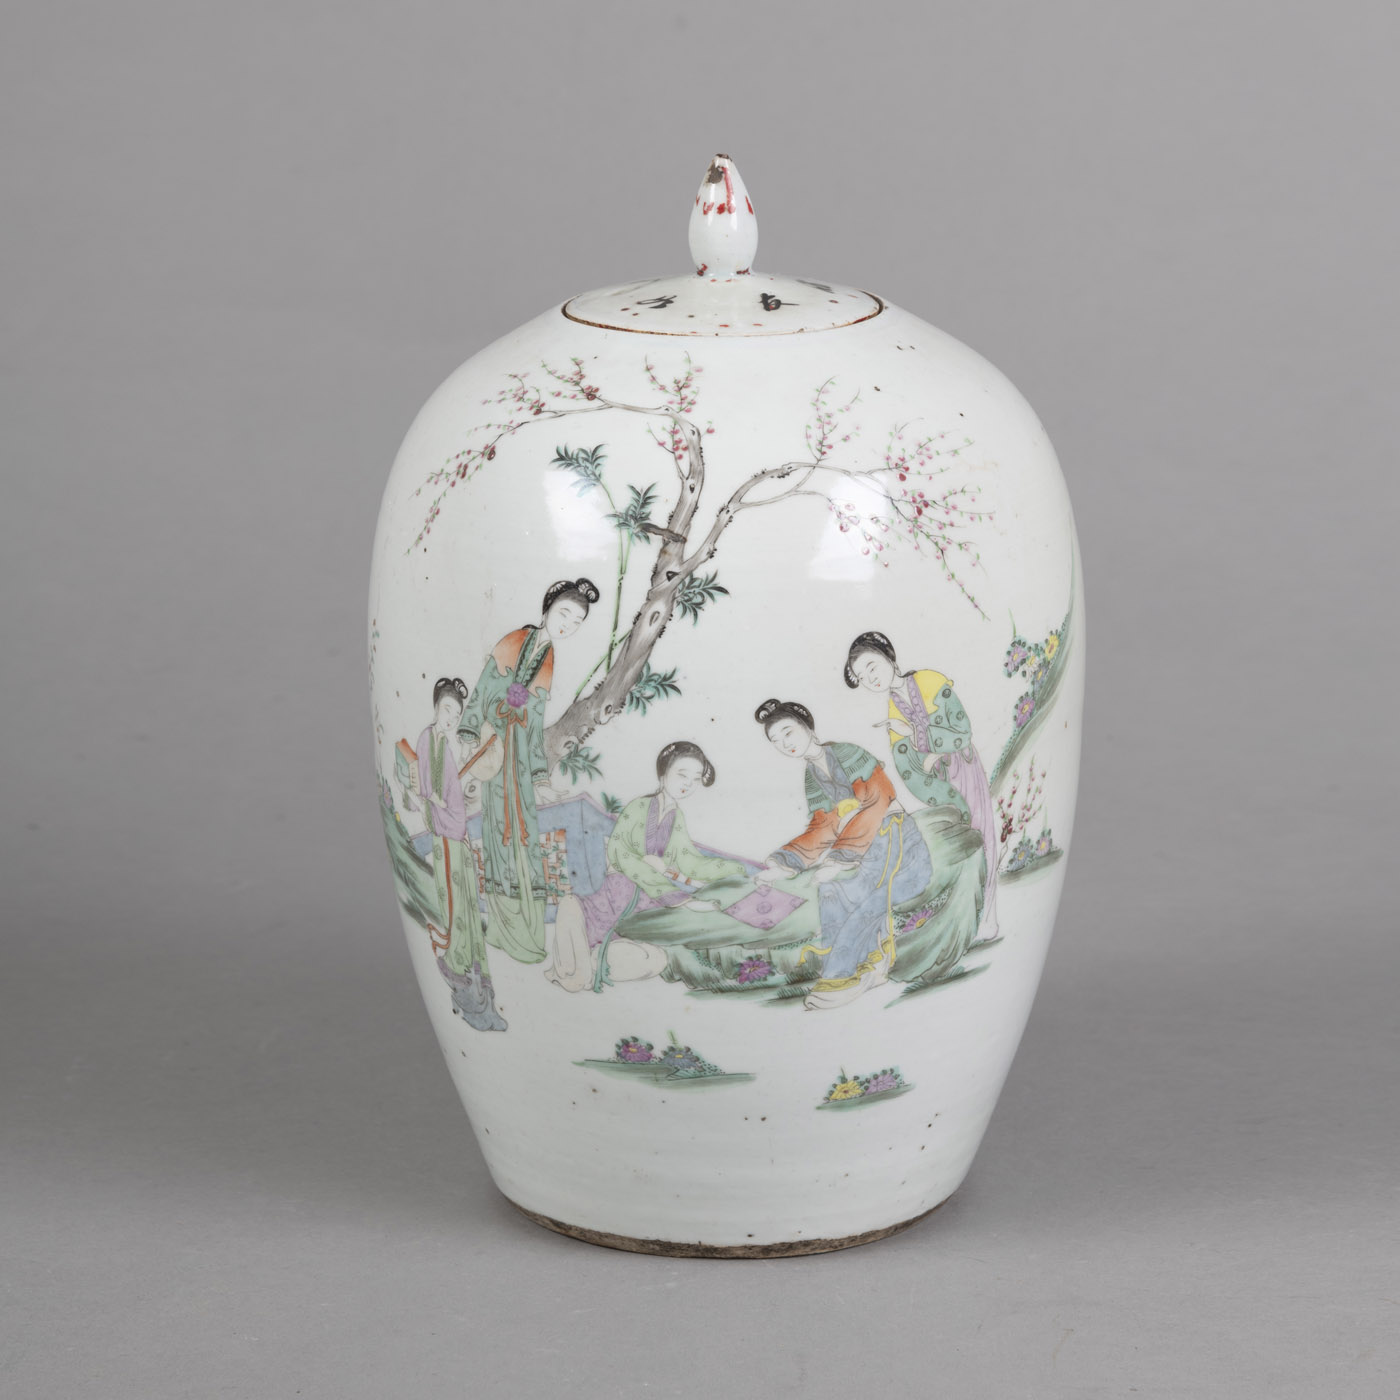 <b>A POLYCHROME PAINTED PORCELAIN VASE AND COVER DEPICTING LADIES IN A GARDEN, ON THE RESERVE AN INSCRIPTION</b>